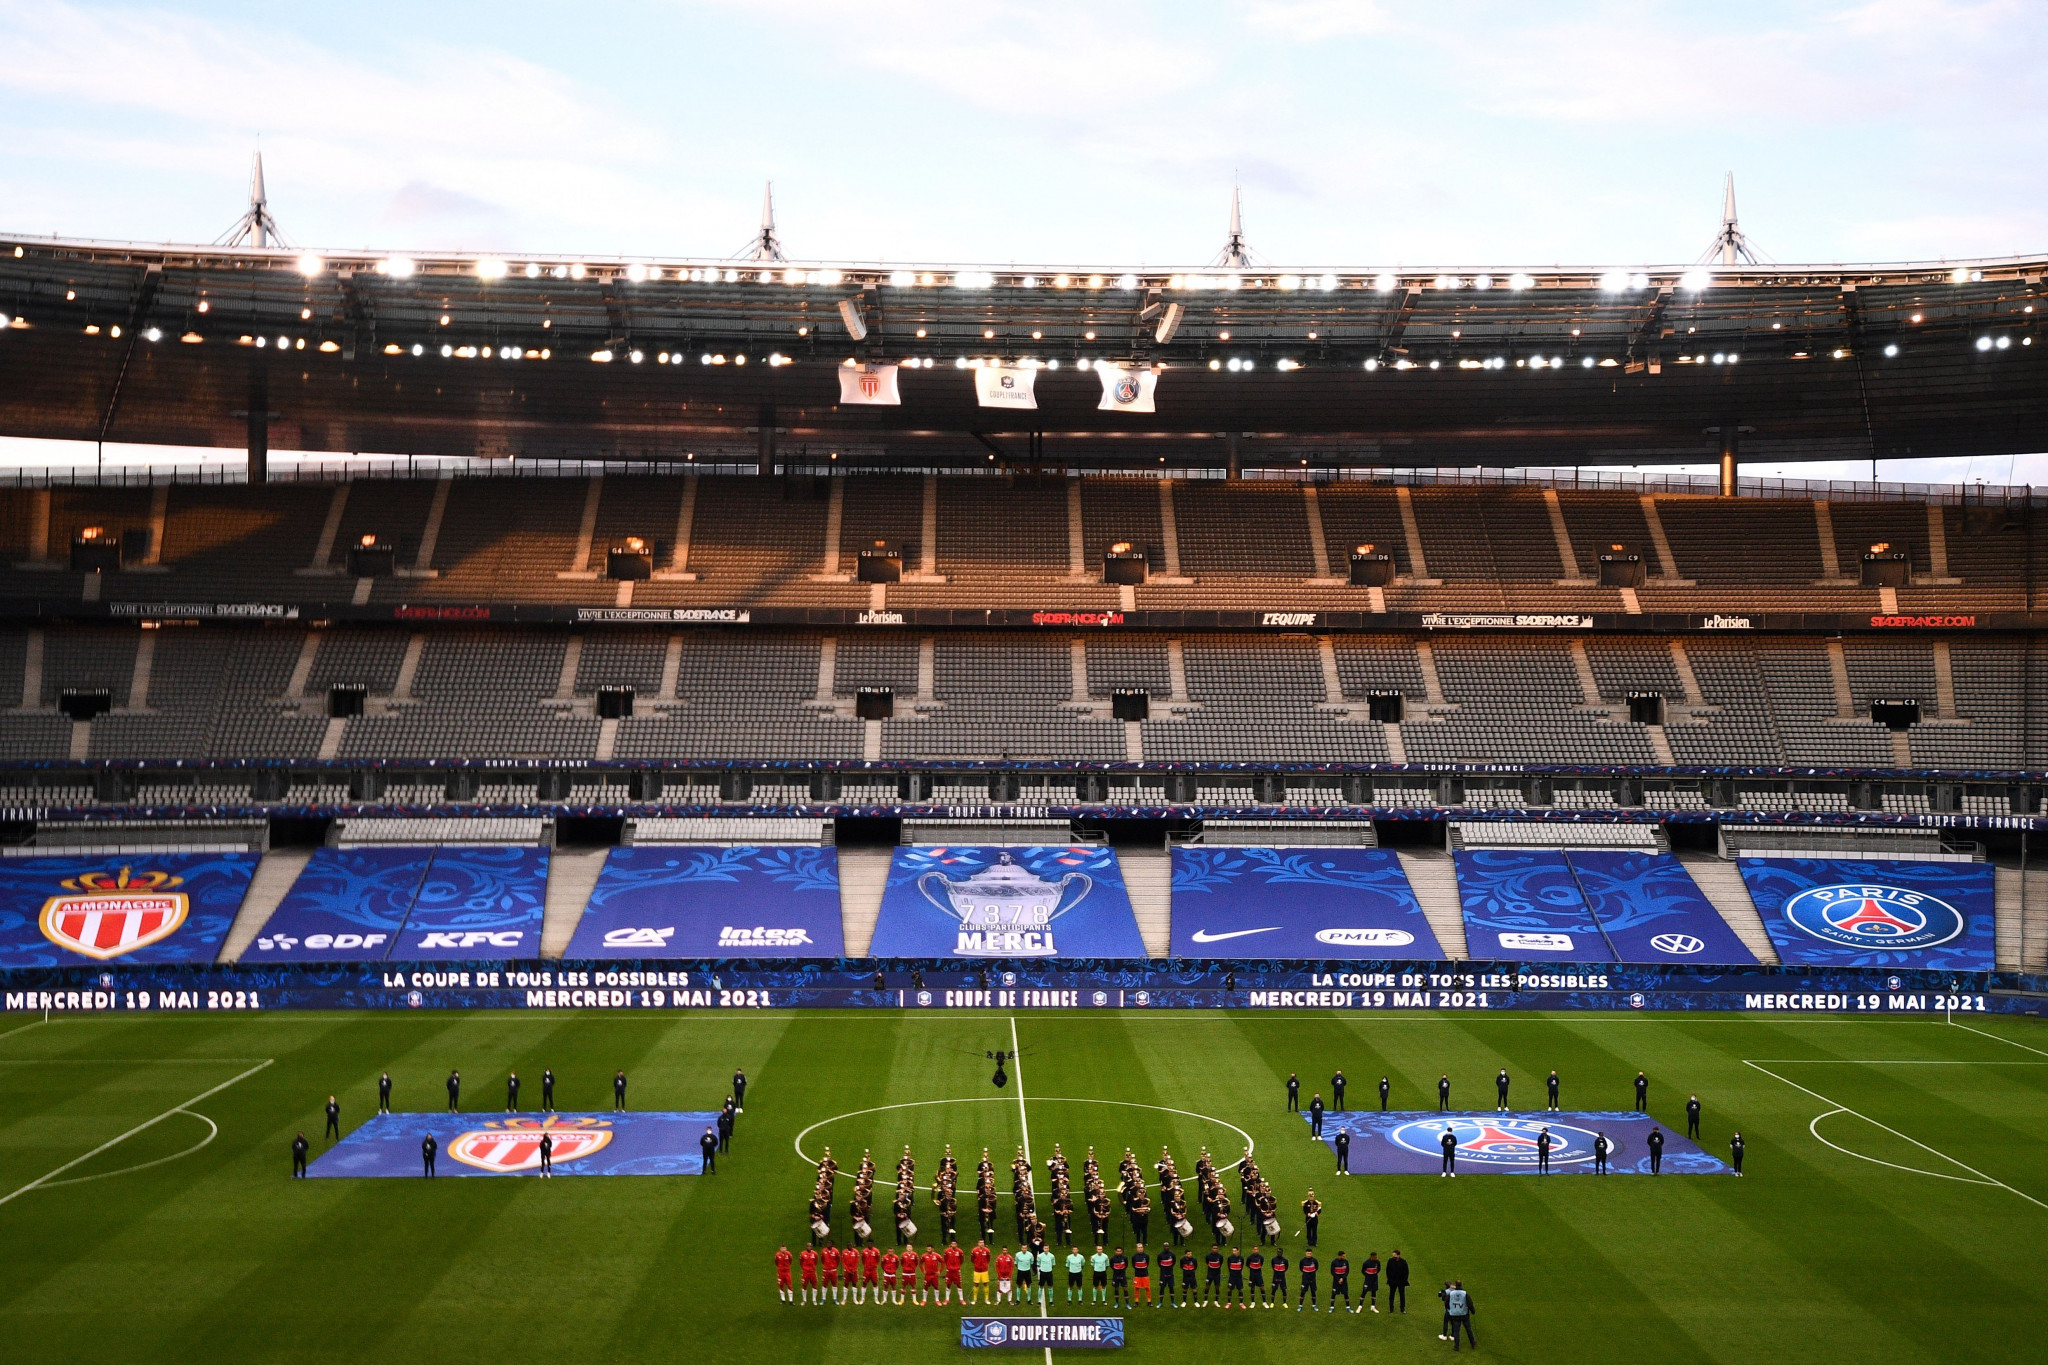 PSG have reportedly applied to take over the Stade de France from 2025 ©Getty Images